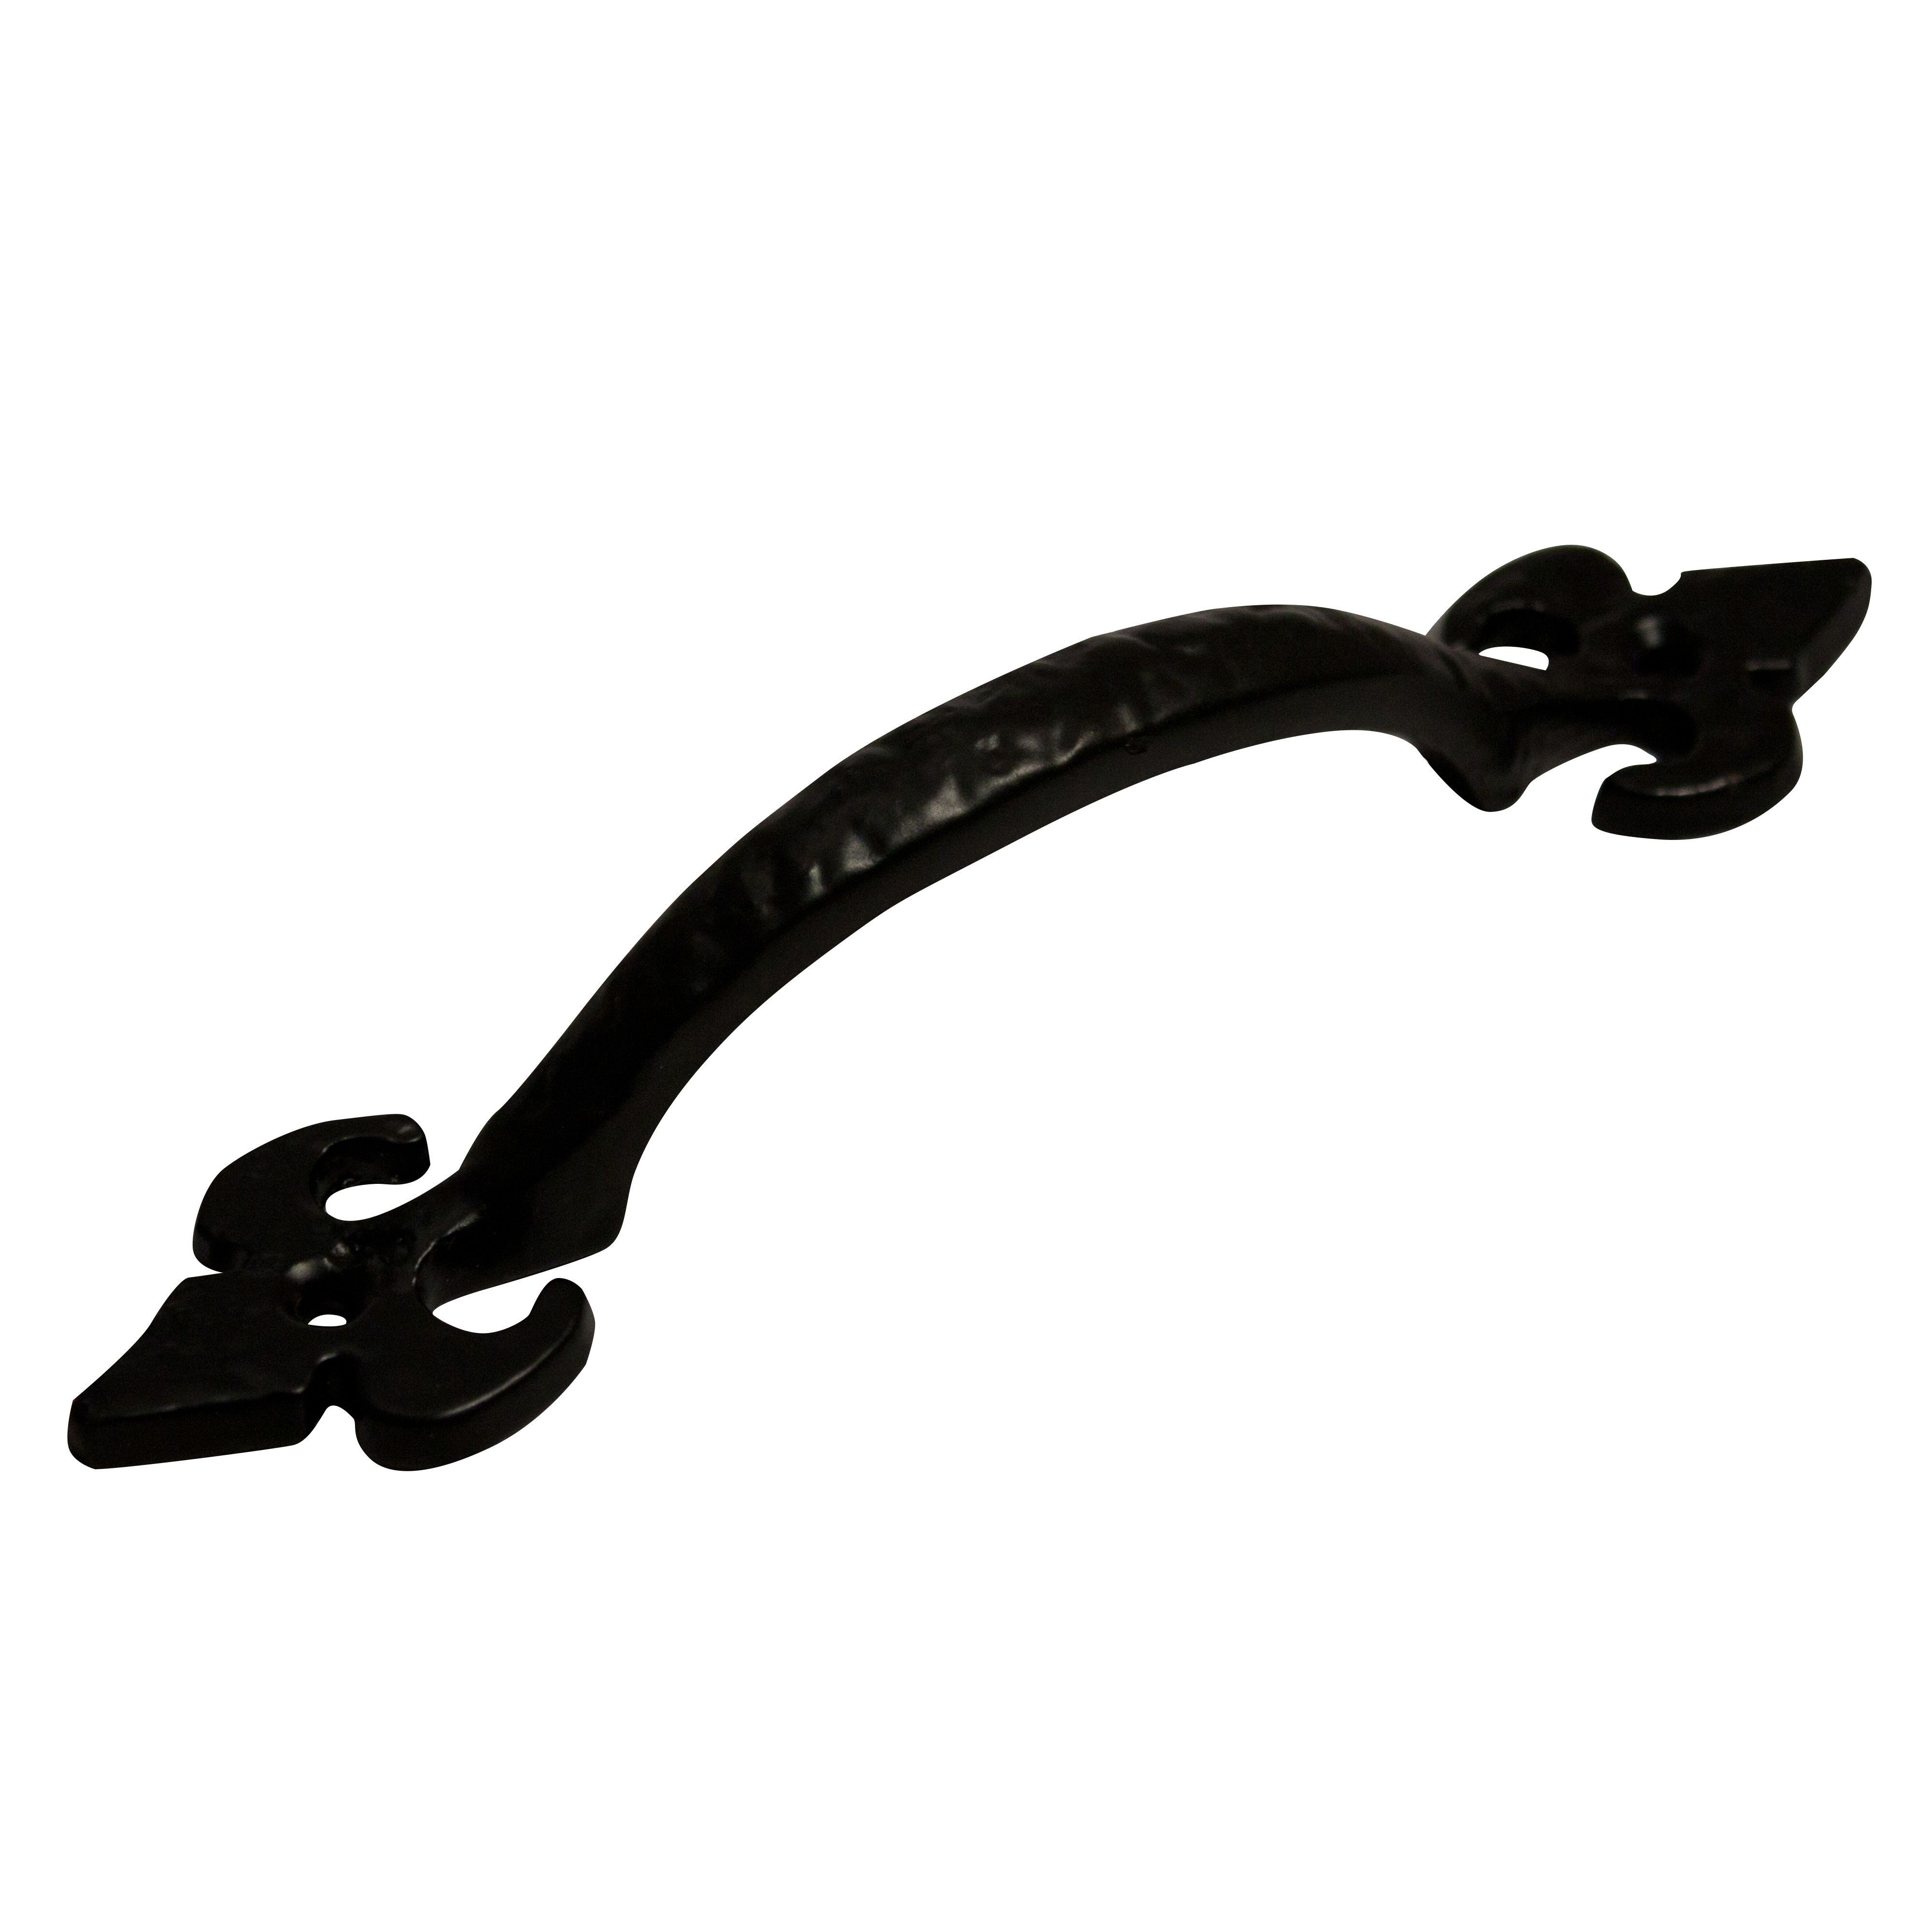 Blooma Black Antique effect Cast iron Cabinet Pull handle